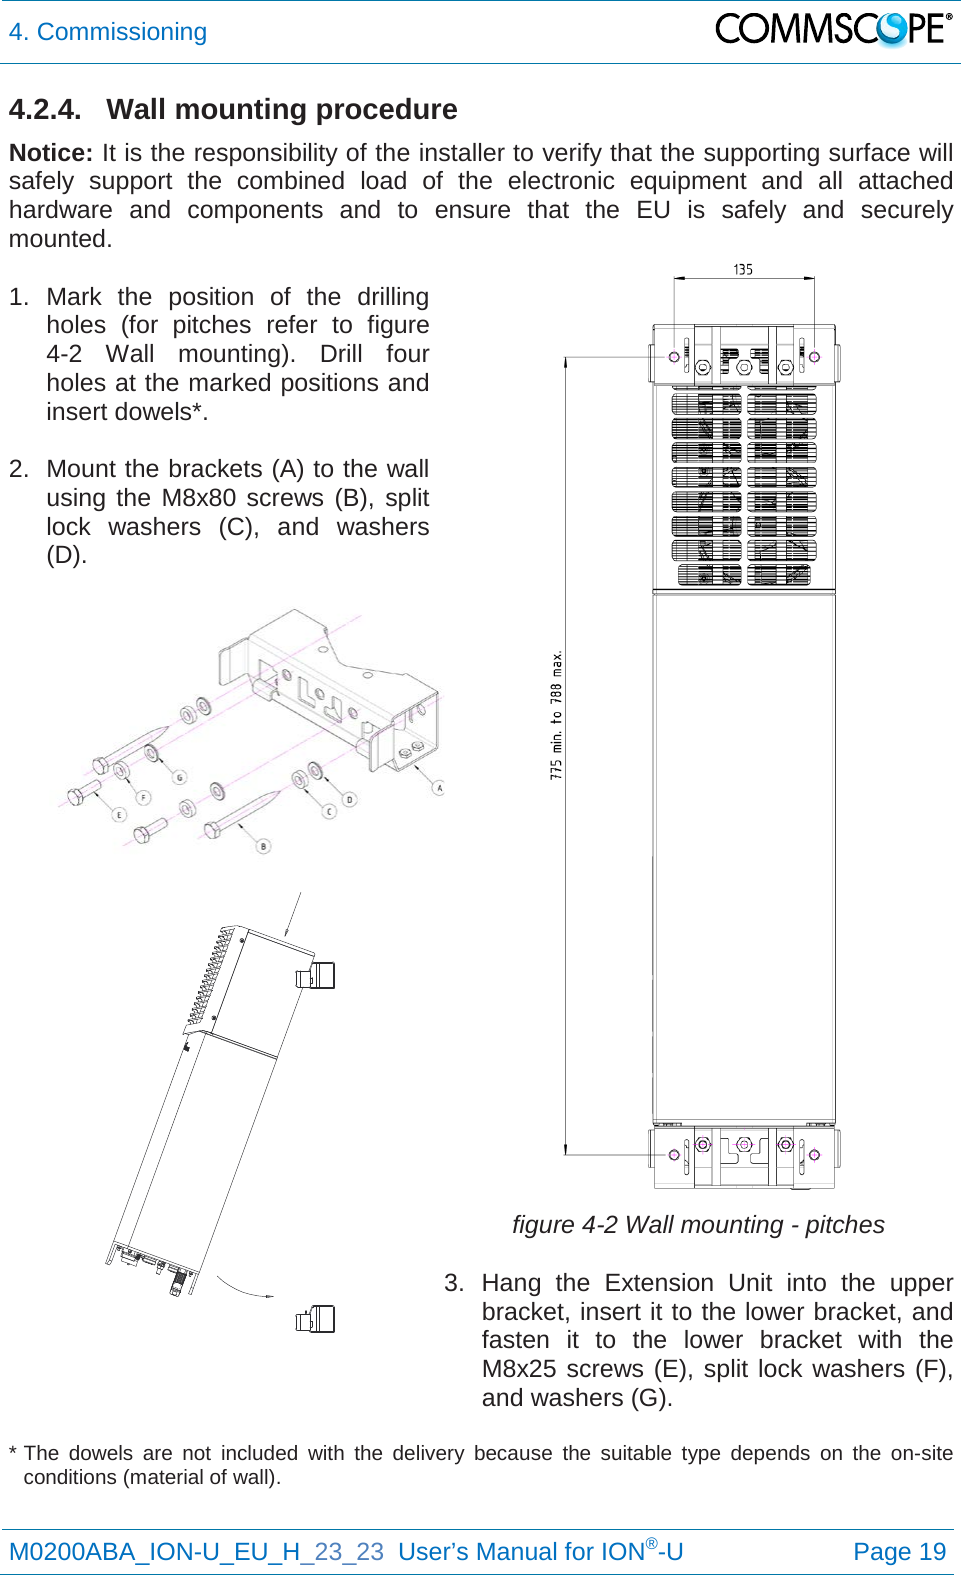 4. Commissioning   M0200ABA_ION-U_EU_H_23_23  User’s Manual for ION®-U  Page 19  4.2.4. Wall mounting procedure Notice: It is the responsibility of the installer to verify that the supporting surface will safely support the combined load of the electronic equipment and all attached hardware and components and to ensure that the EU is safely and securely mounted.  1. Mark the position of the drilling holes (for pitches refer to figure 4-2  Wall mounting). Drill four holes at the marked positions and insert dowels*.  2.  Mount the brackets (A) to the wall using the M8x80 screws (B), split lock  washers (C),  and washers (D).       figure 4-2 Wall mounting - pitches  3. Hang the Extension Unit into the upper bracket, insert it to the lower bracket, and fasten it to the lower bracket with the M8x25 screws (E), split lock washers (F), and washers (G).  * The dowels are not included with the delivery  because the suitable type depends on the on-site conditions (material of wall).  